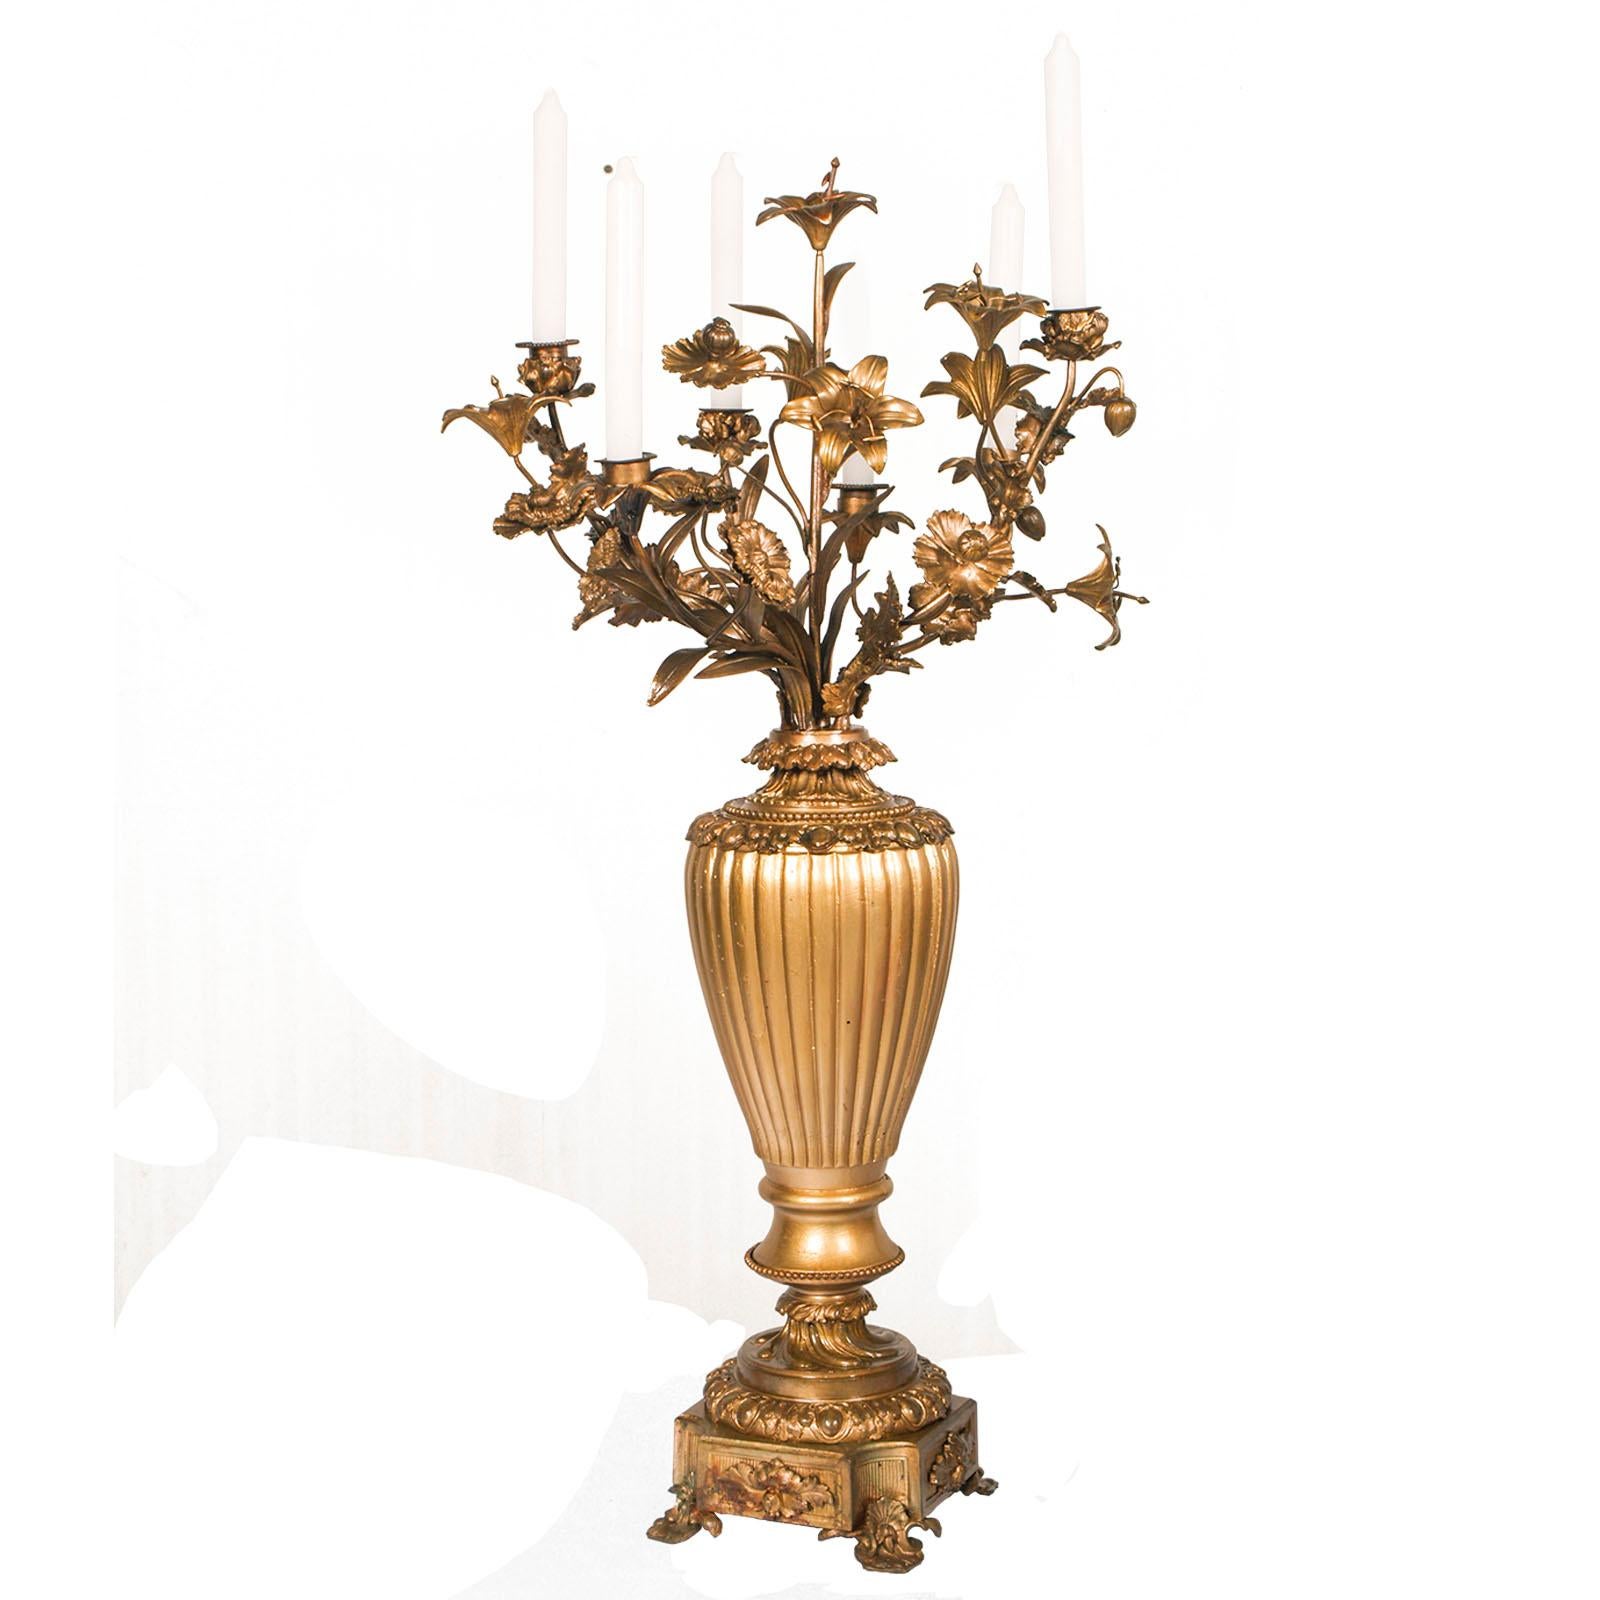 Precious 1700s Baroque French candelabrum, in golden bronze and gilt wood of walnut. 
Wonderful as a table centerpiece or to embellish a corner of the dining room

Measures cm: Height 82 x diameter 40.